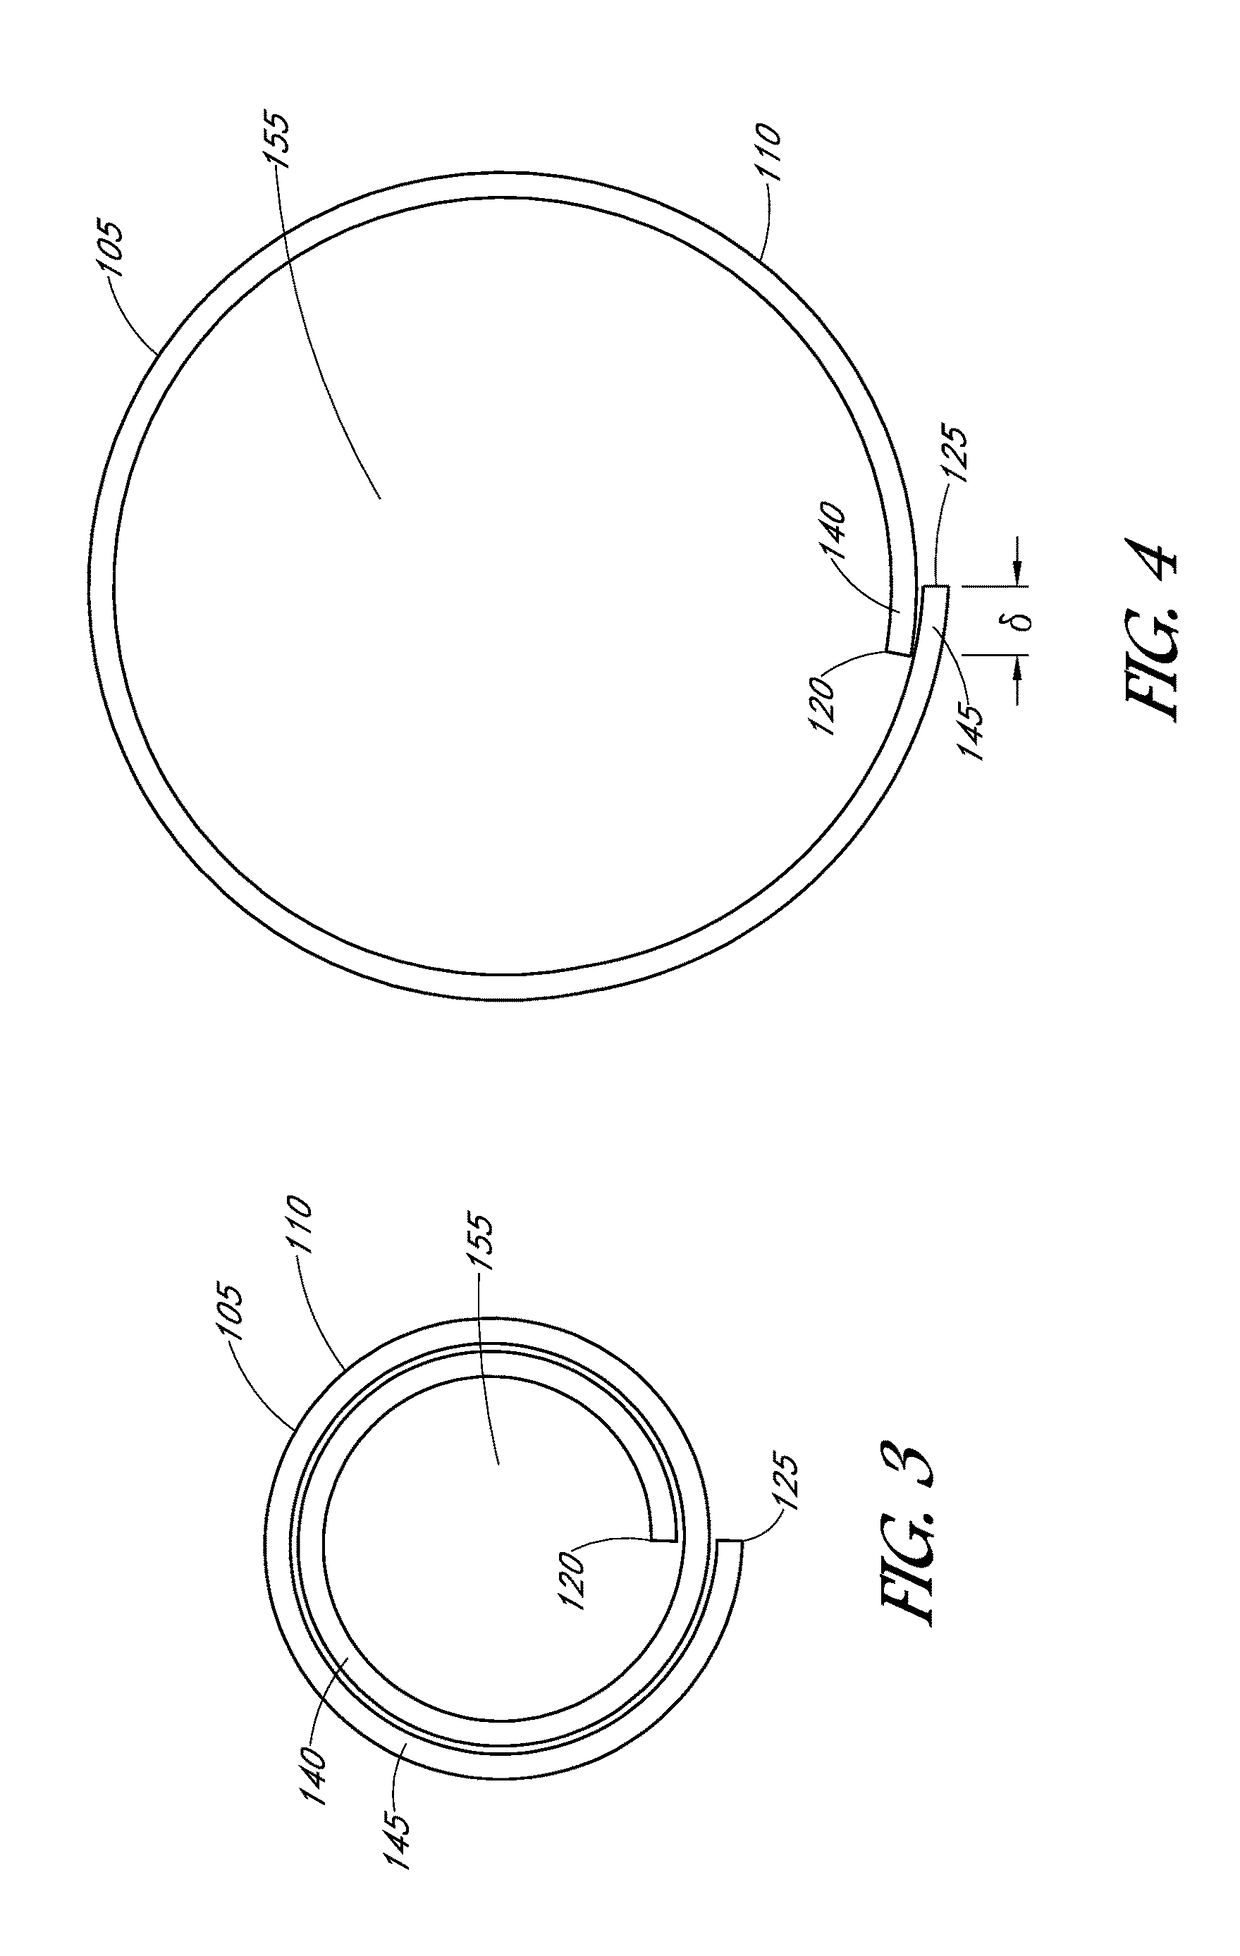 Expandable sheath and methods of use